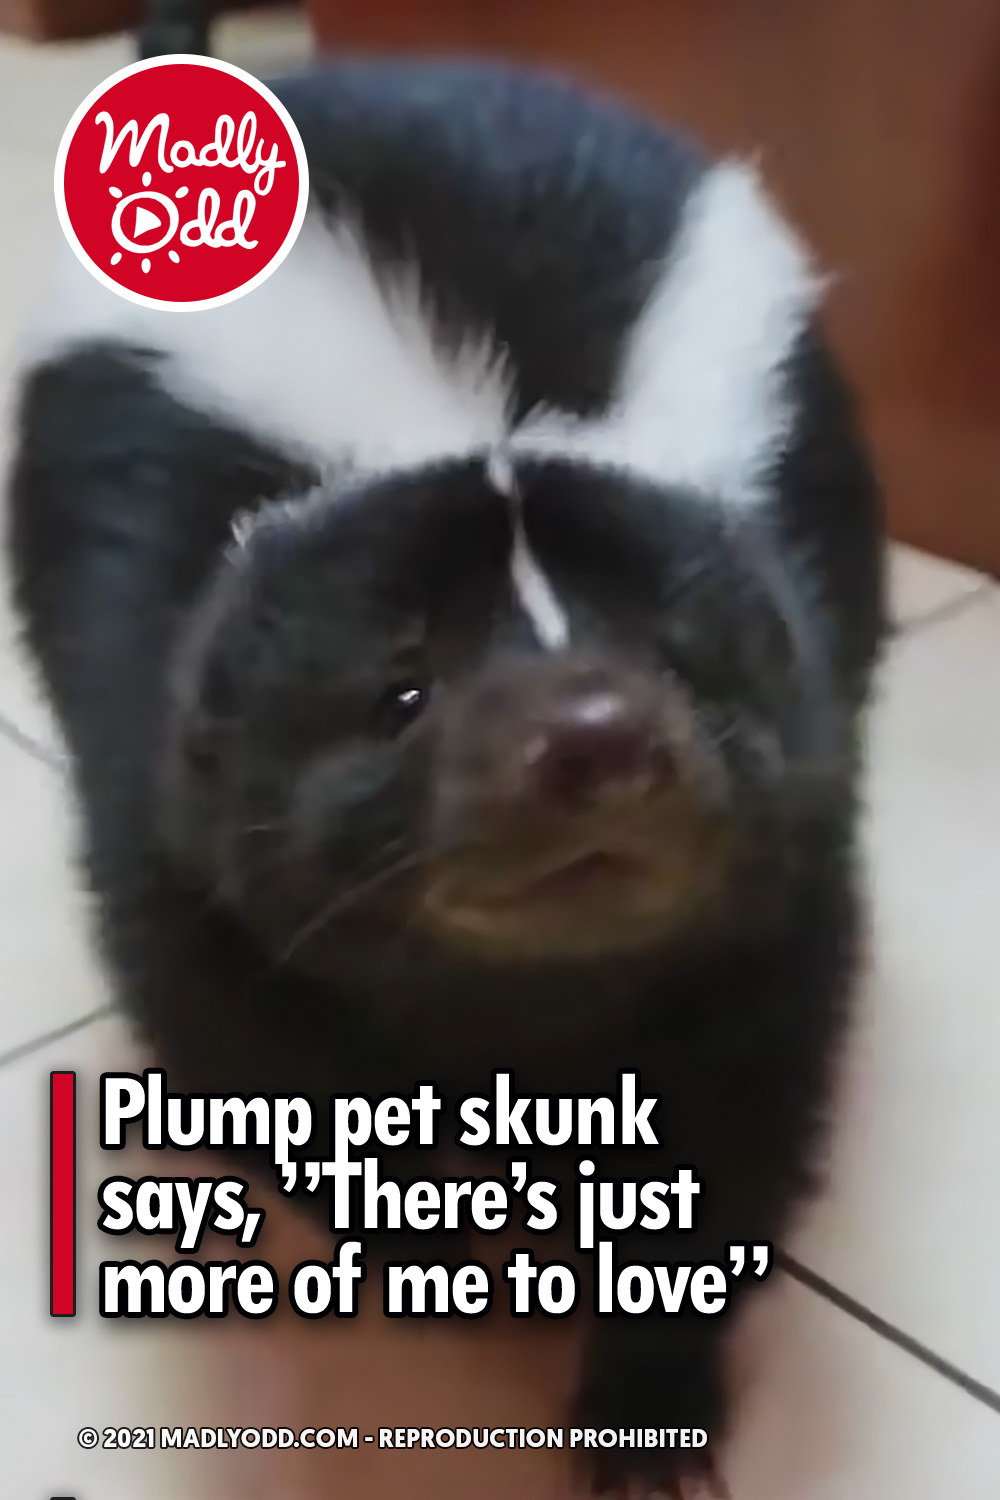 Plump pet skunk says, ”There’s just more of me to love”